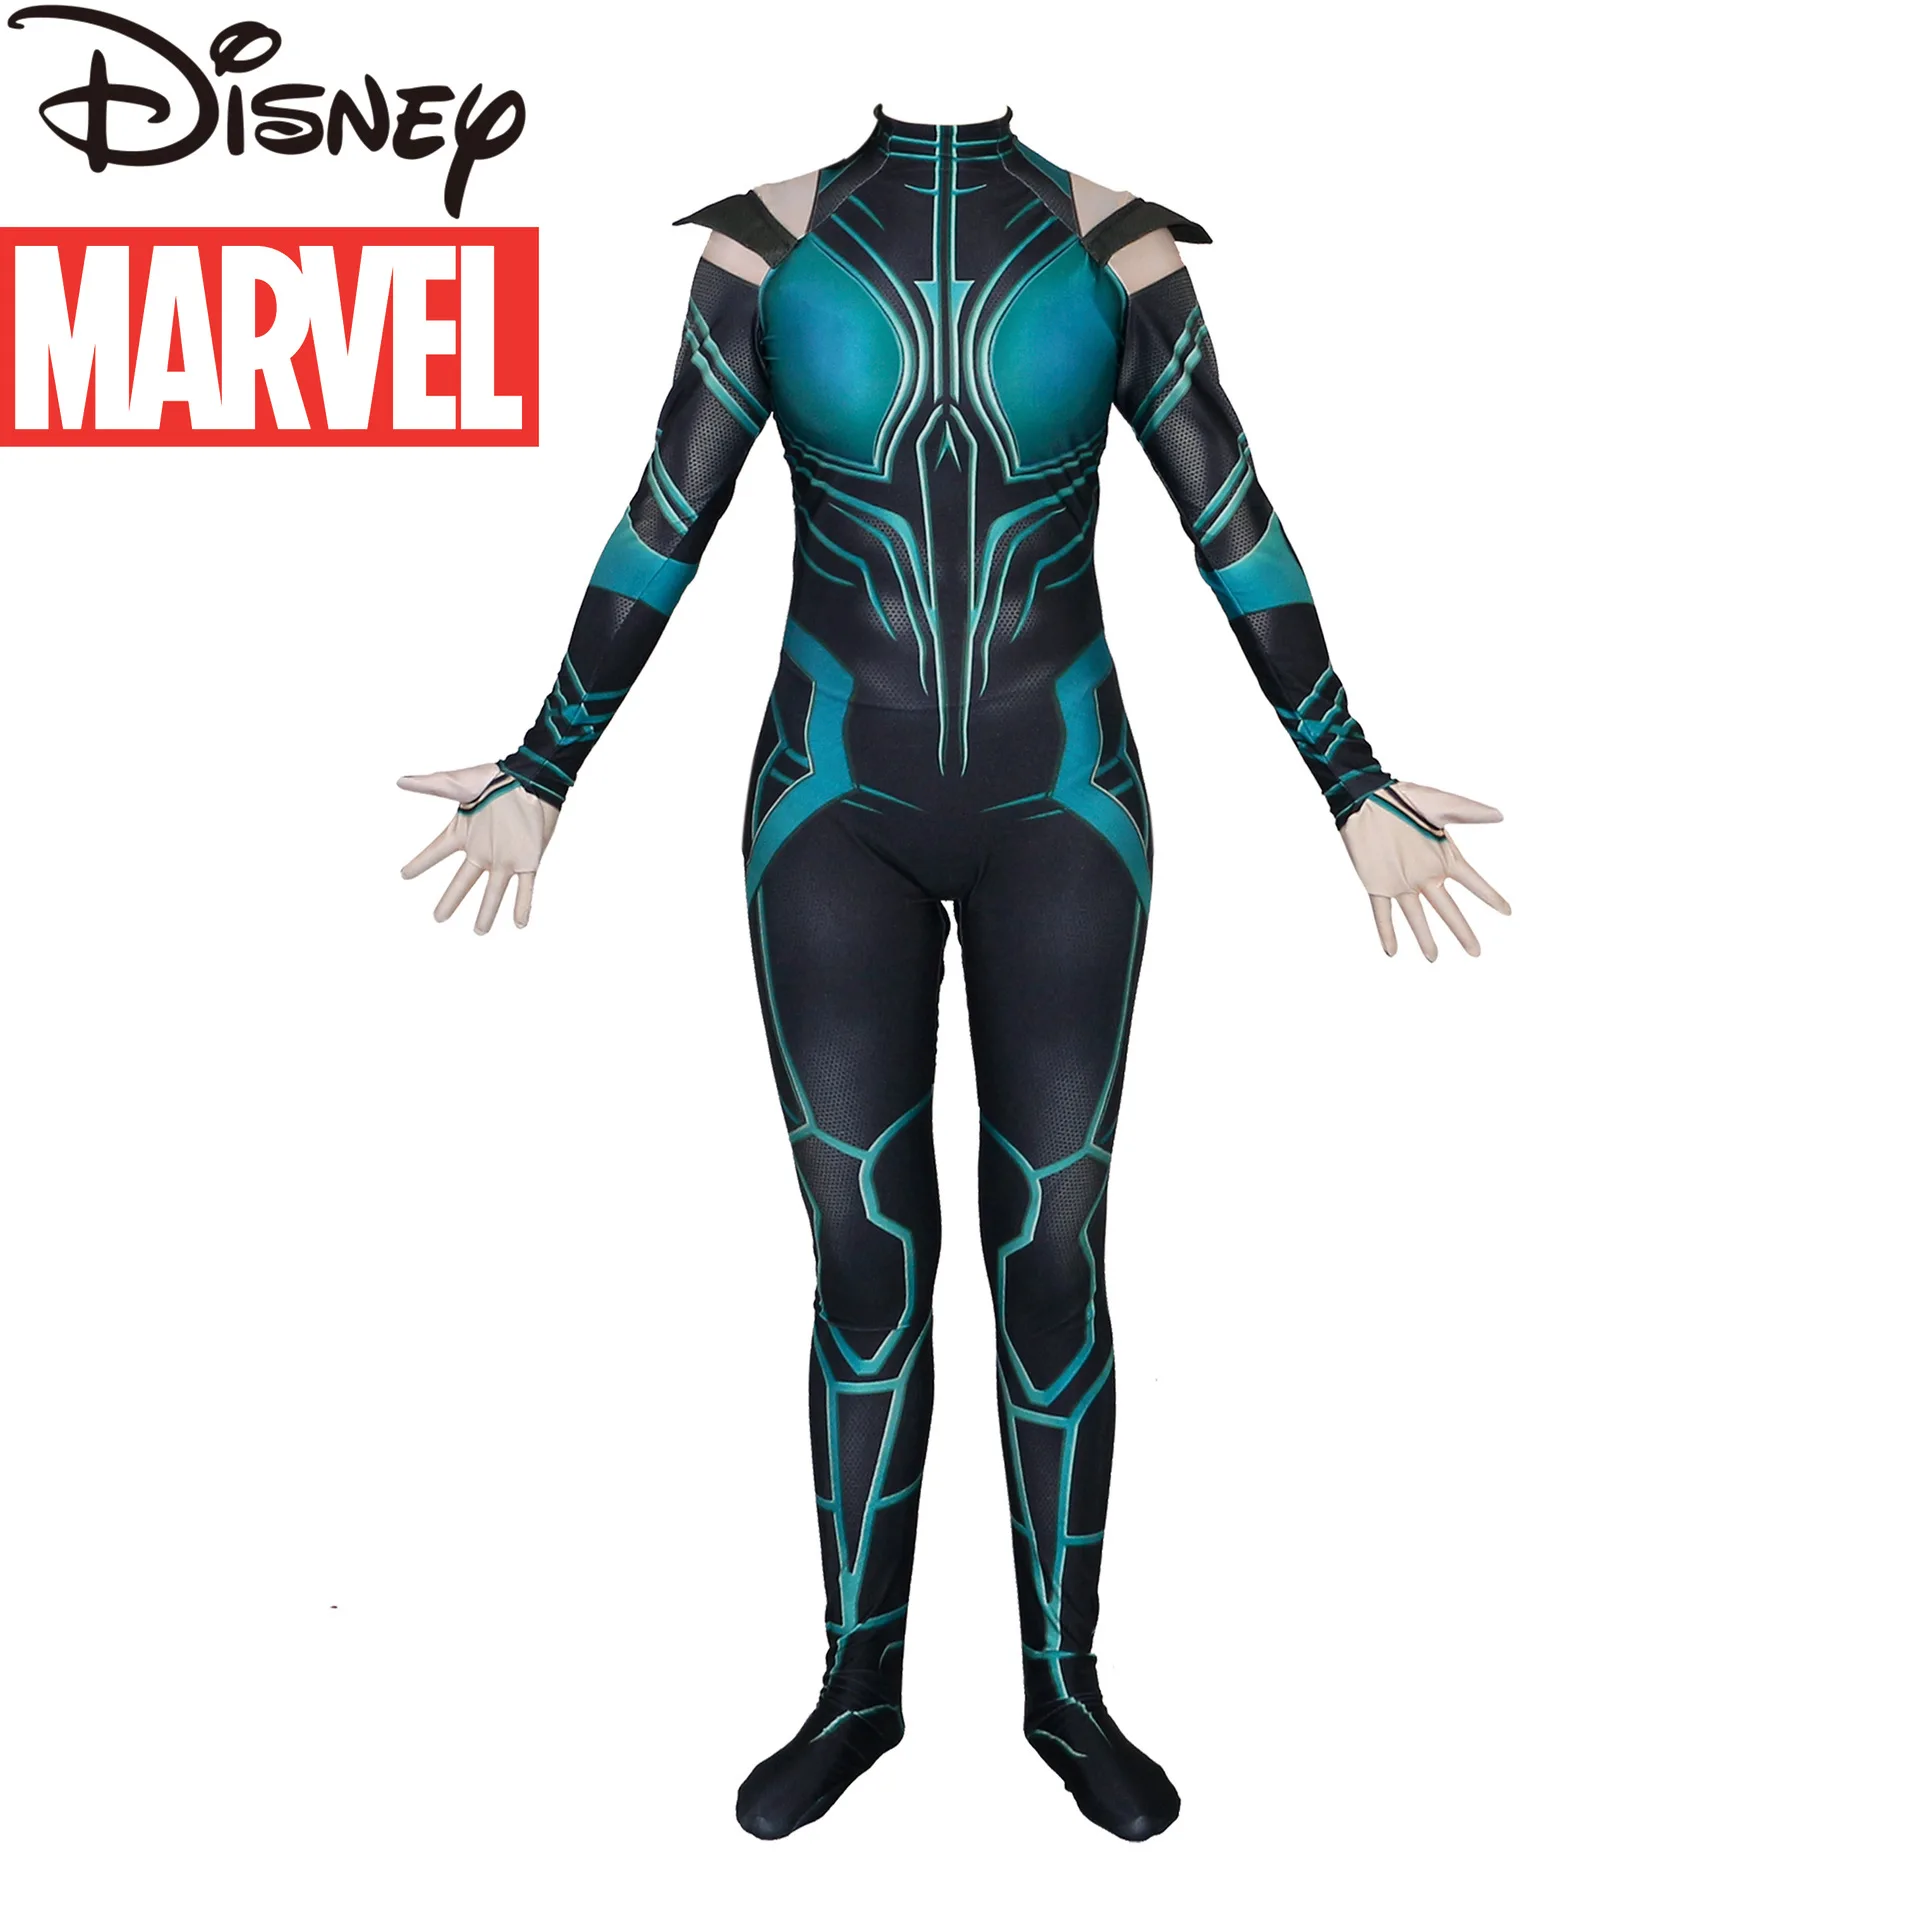 

Disney Marvel Avengers 3D Printing Marvel Character Death Goddess Hela Child Body Tights Show Clothes Halloween Cosplay Costumes